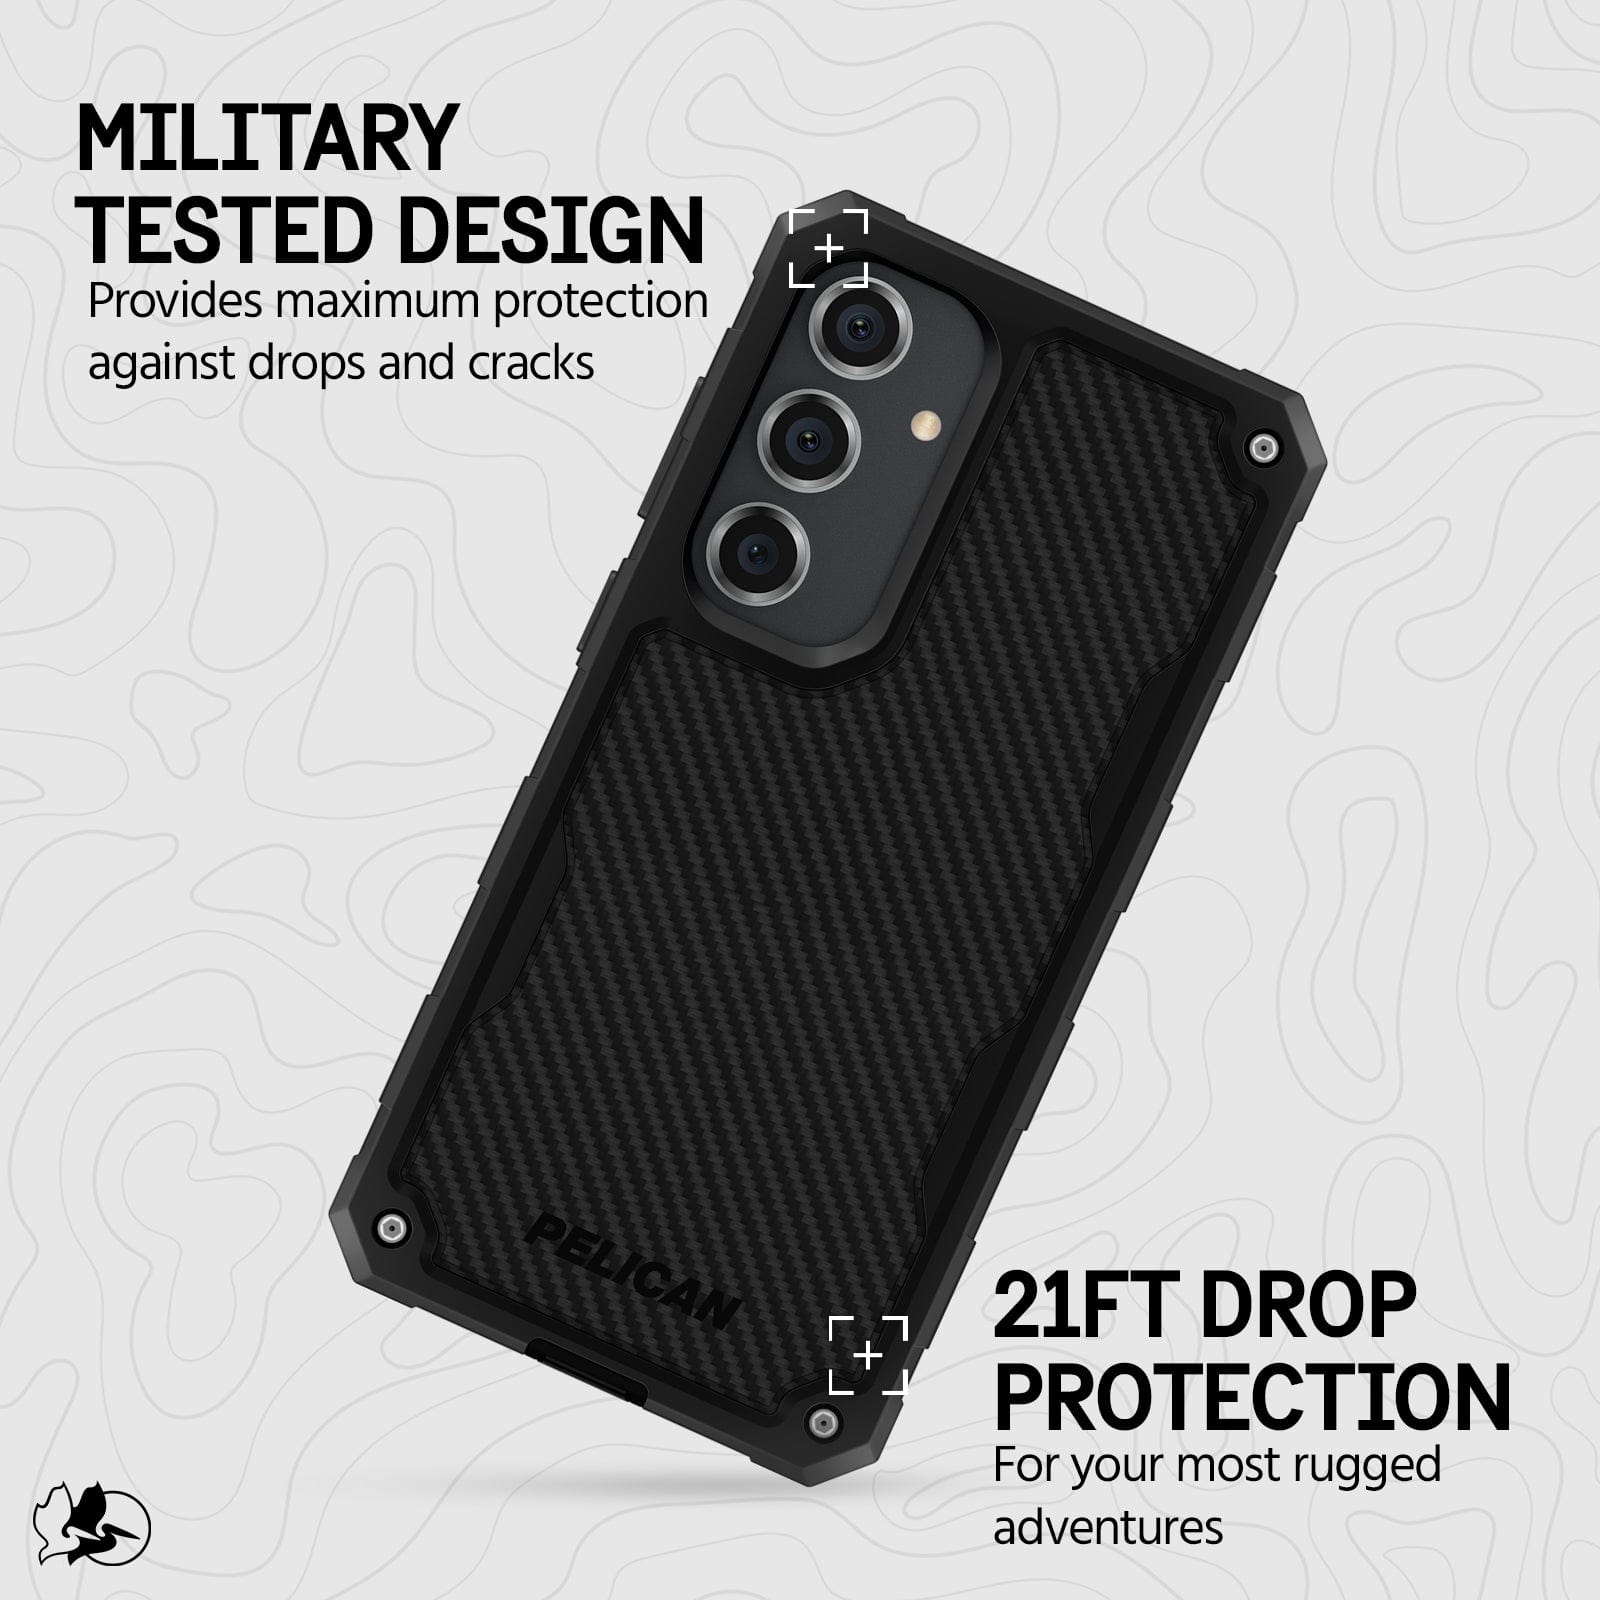 MILITARY TESTED DESIGN PROVIDES MAXIMUM PROTECTION AGAINST DROPS AND CRACKS. 21FT DROP PROTECTION FOR YOUR MOST RUGGED ADVENTURES